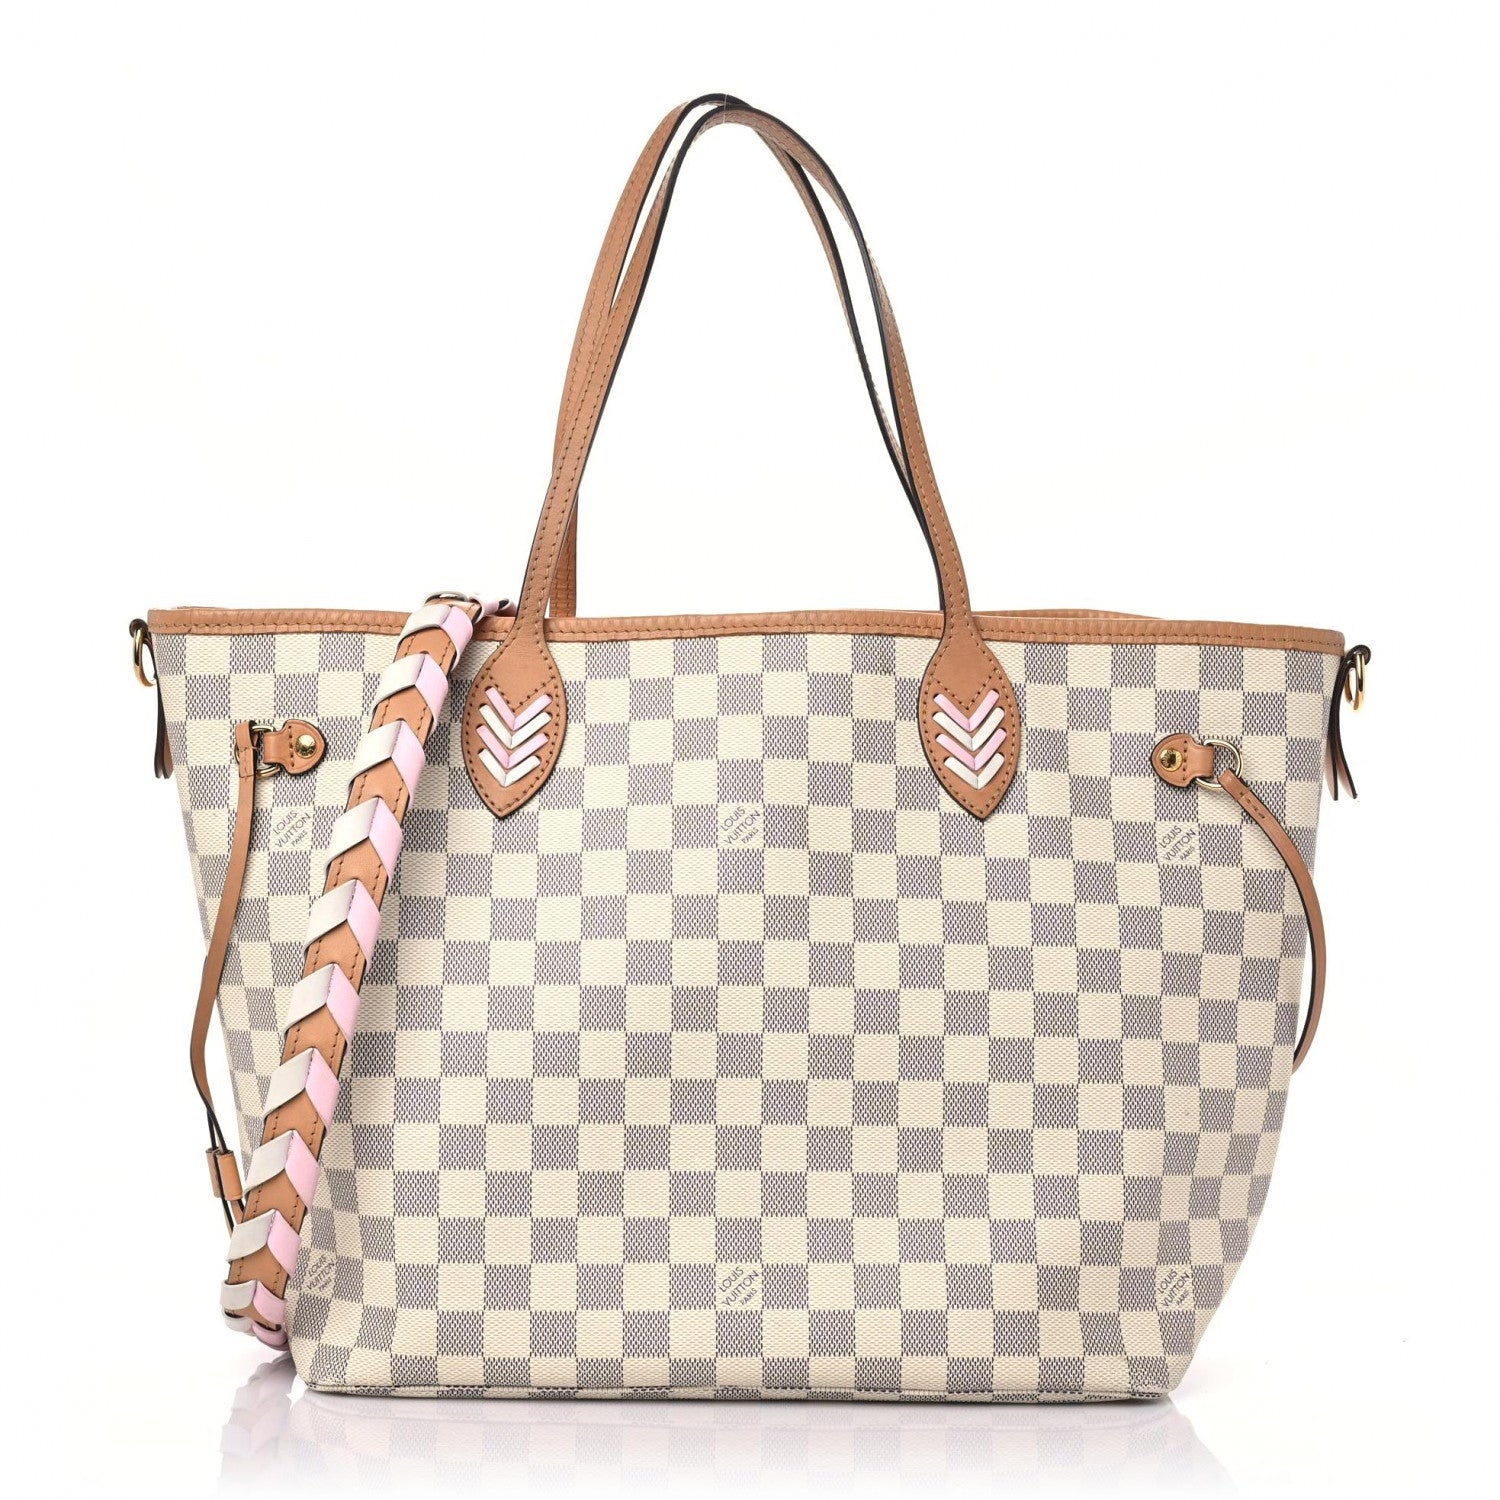 LOUIS VUITTON LIMITED EDITION DAMIER AZUR BRAIDED NEVERFULL MM